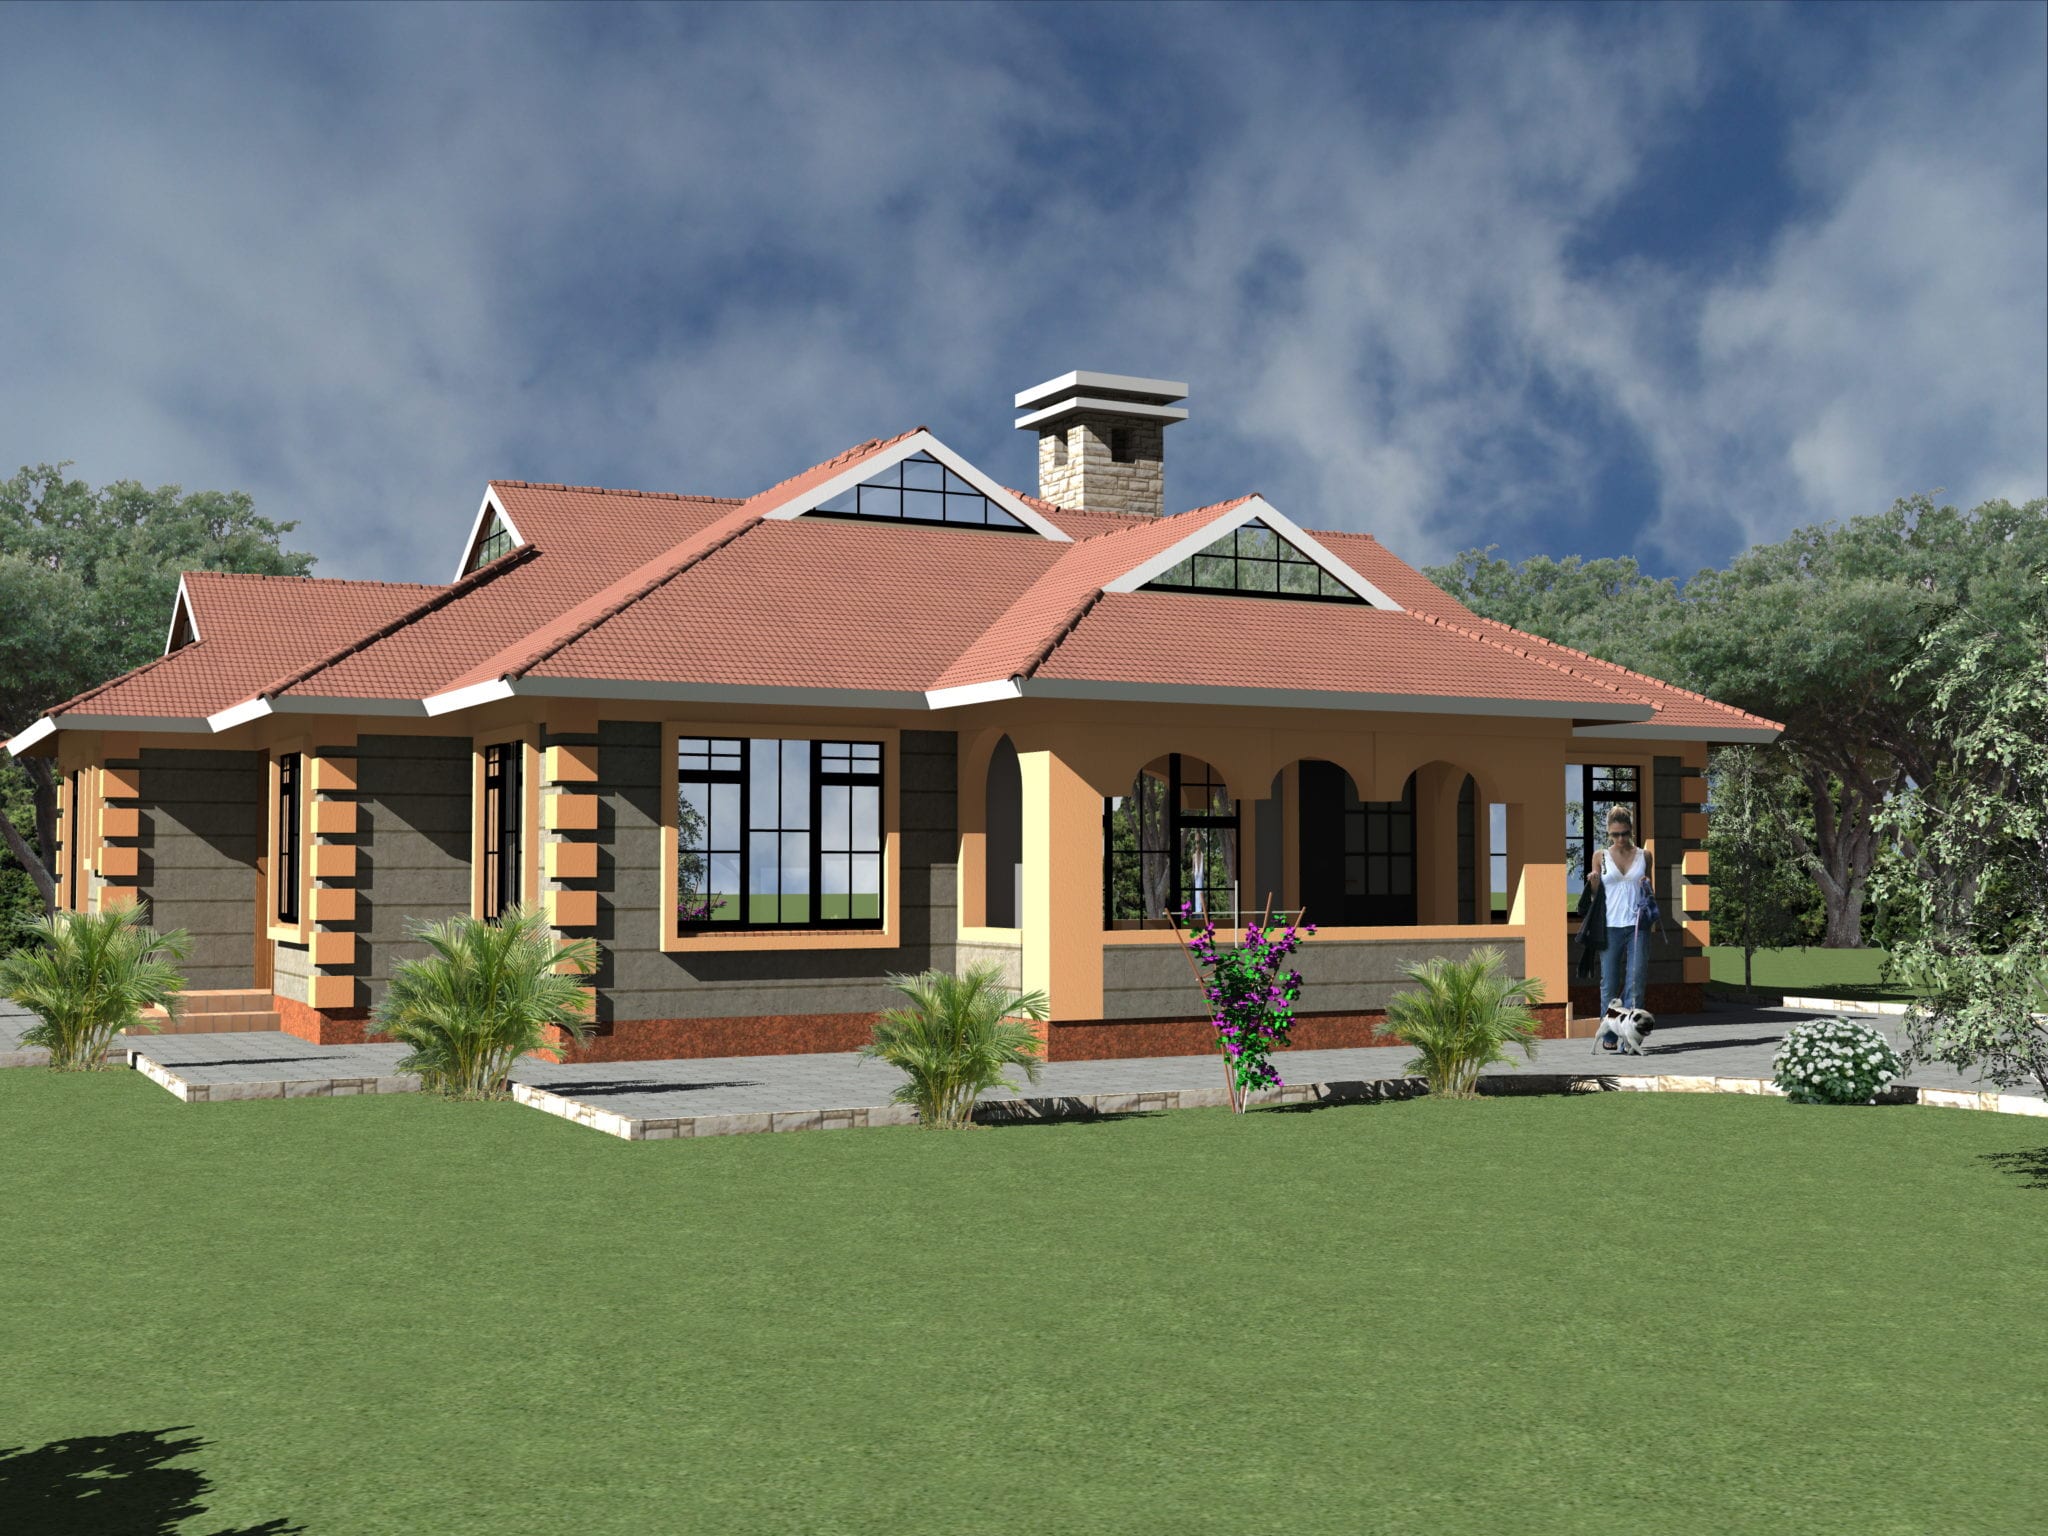 4 Bedroom Single Story House Plans